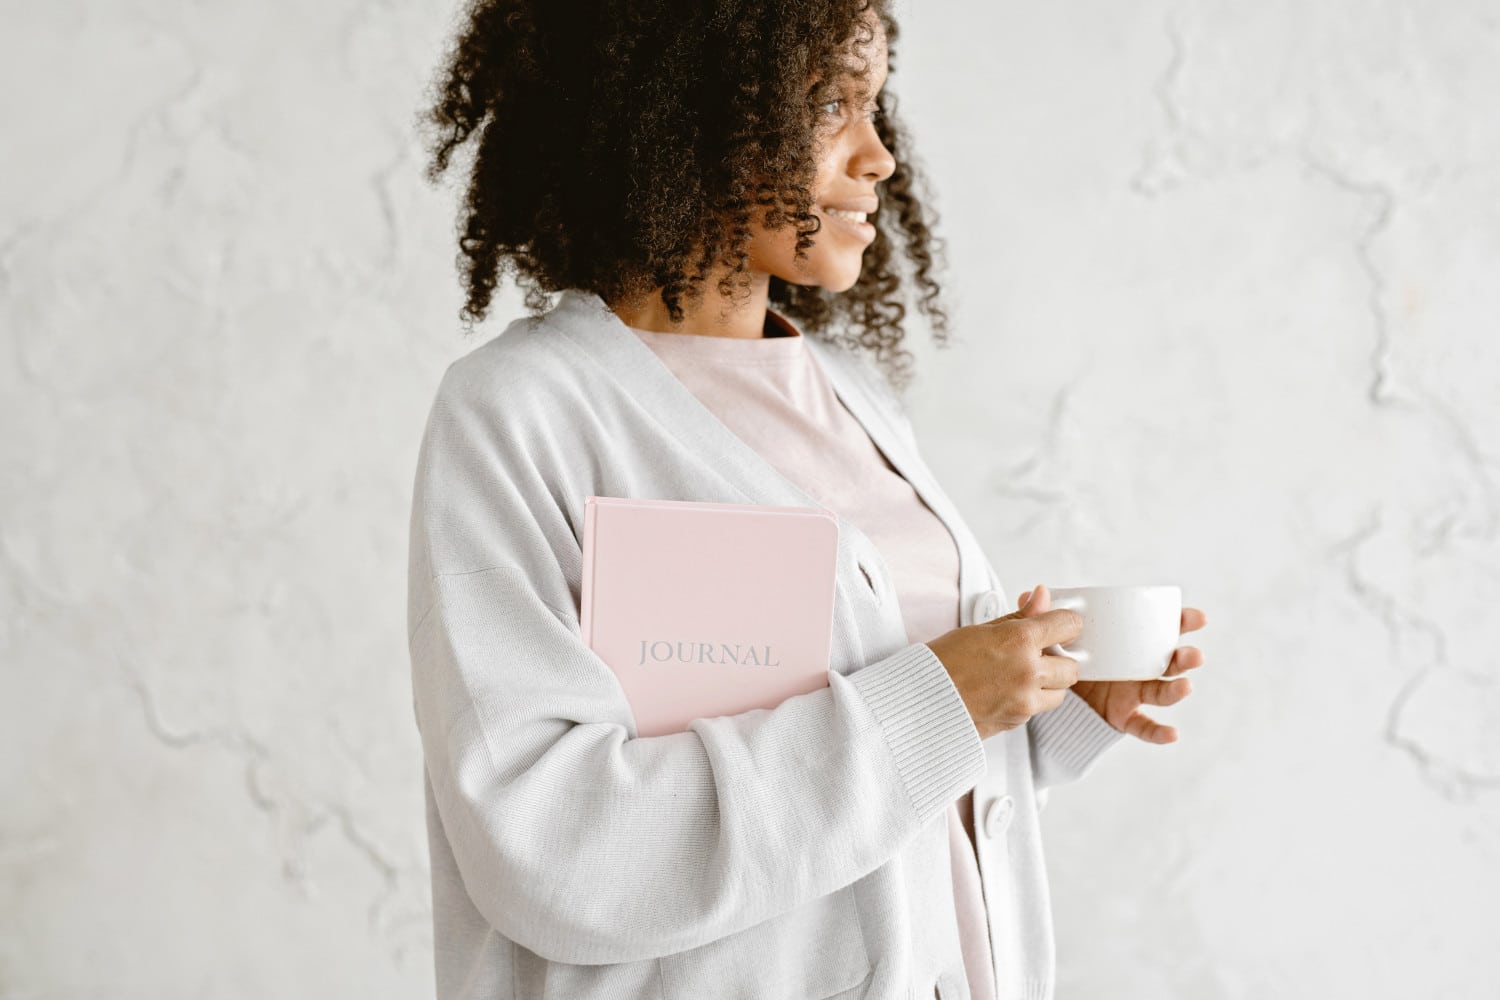 A smiling woman holding an affirmation journal and a white cup